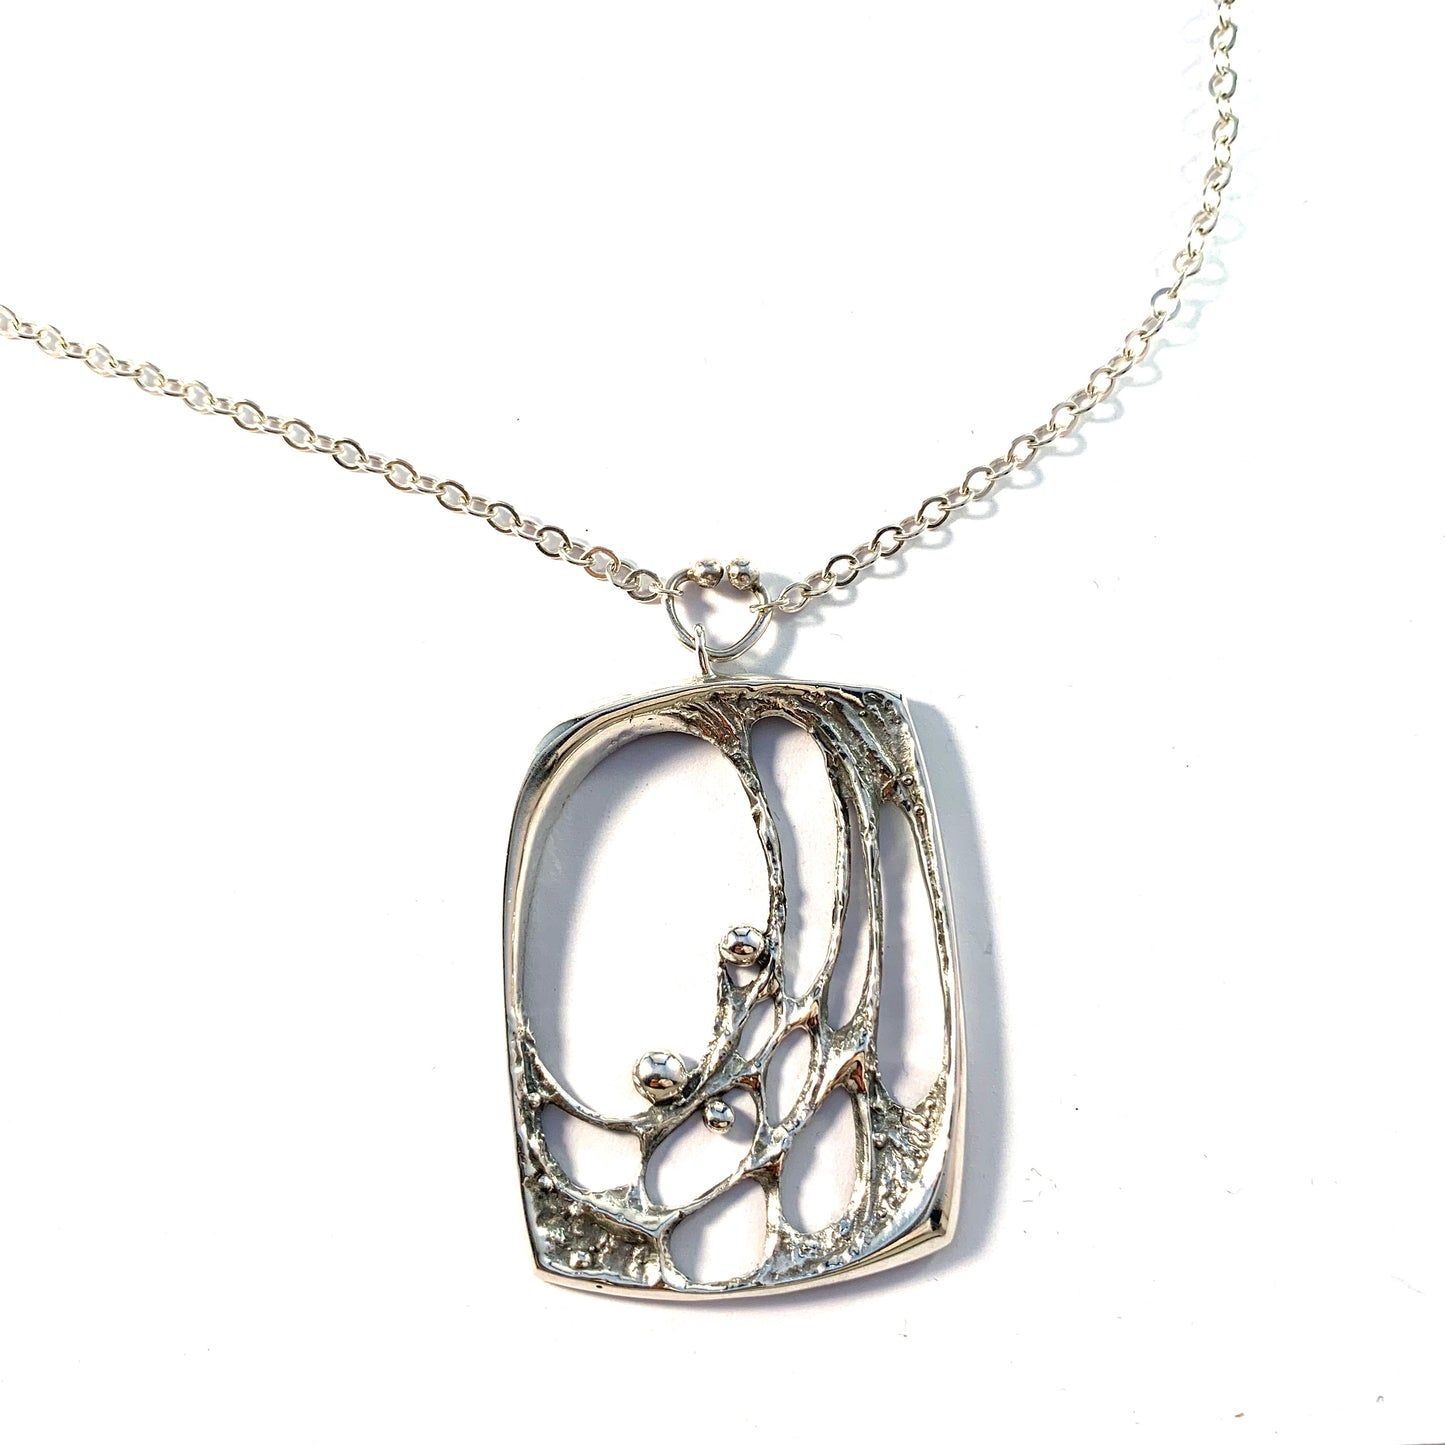 Karl Laine for Sten & Laine Finland year 1975 Sterling Silver Spider Web Large Pendant Necklace.